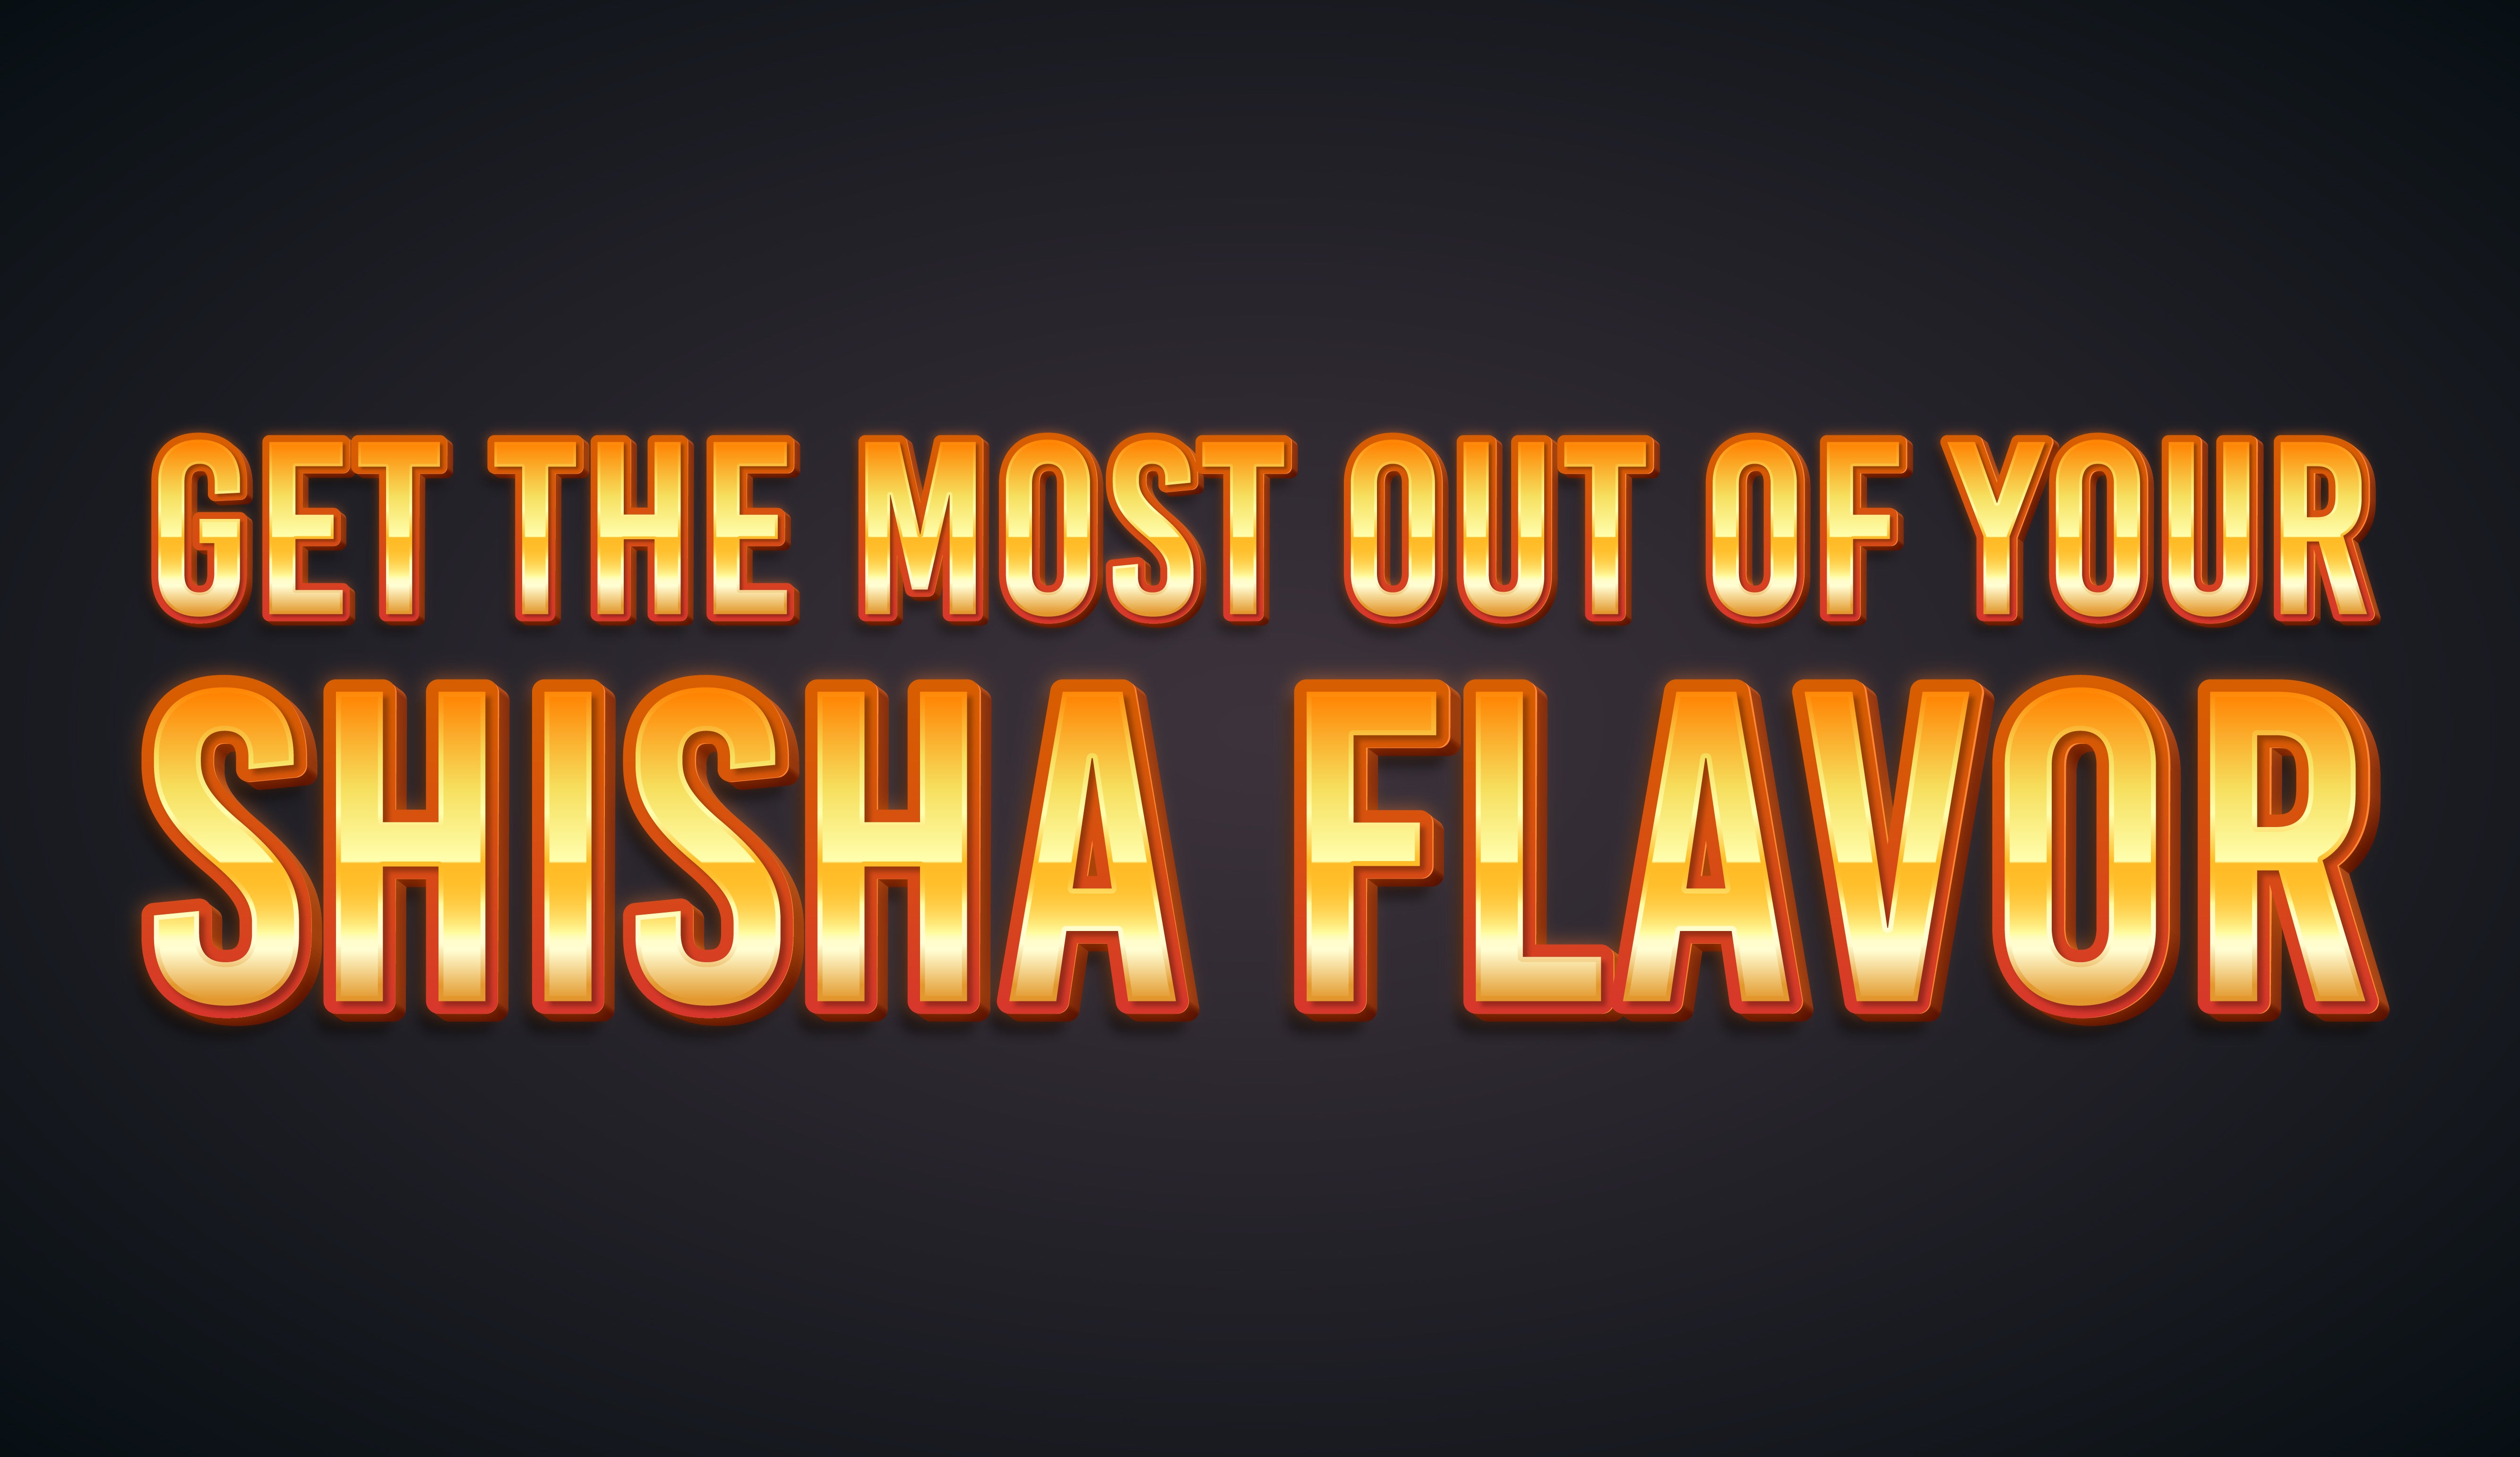 Get the Most out of your Shisha Flavor